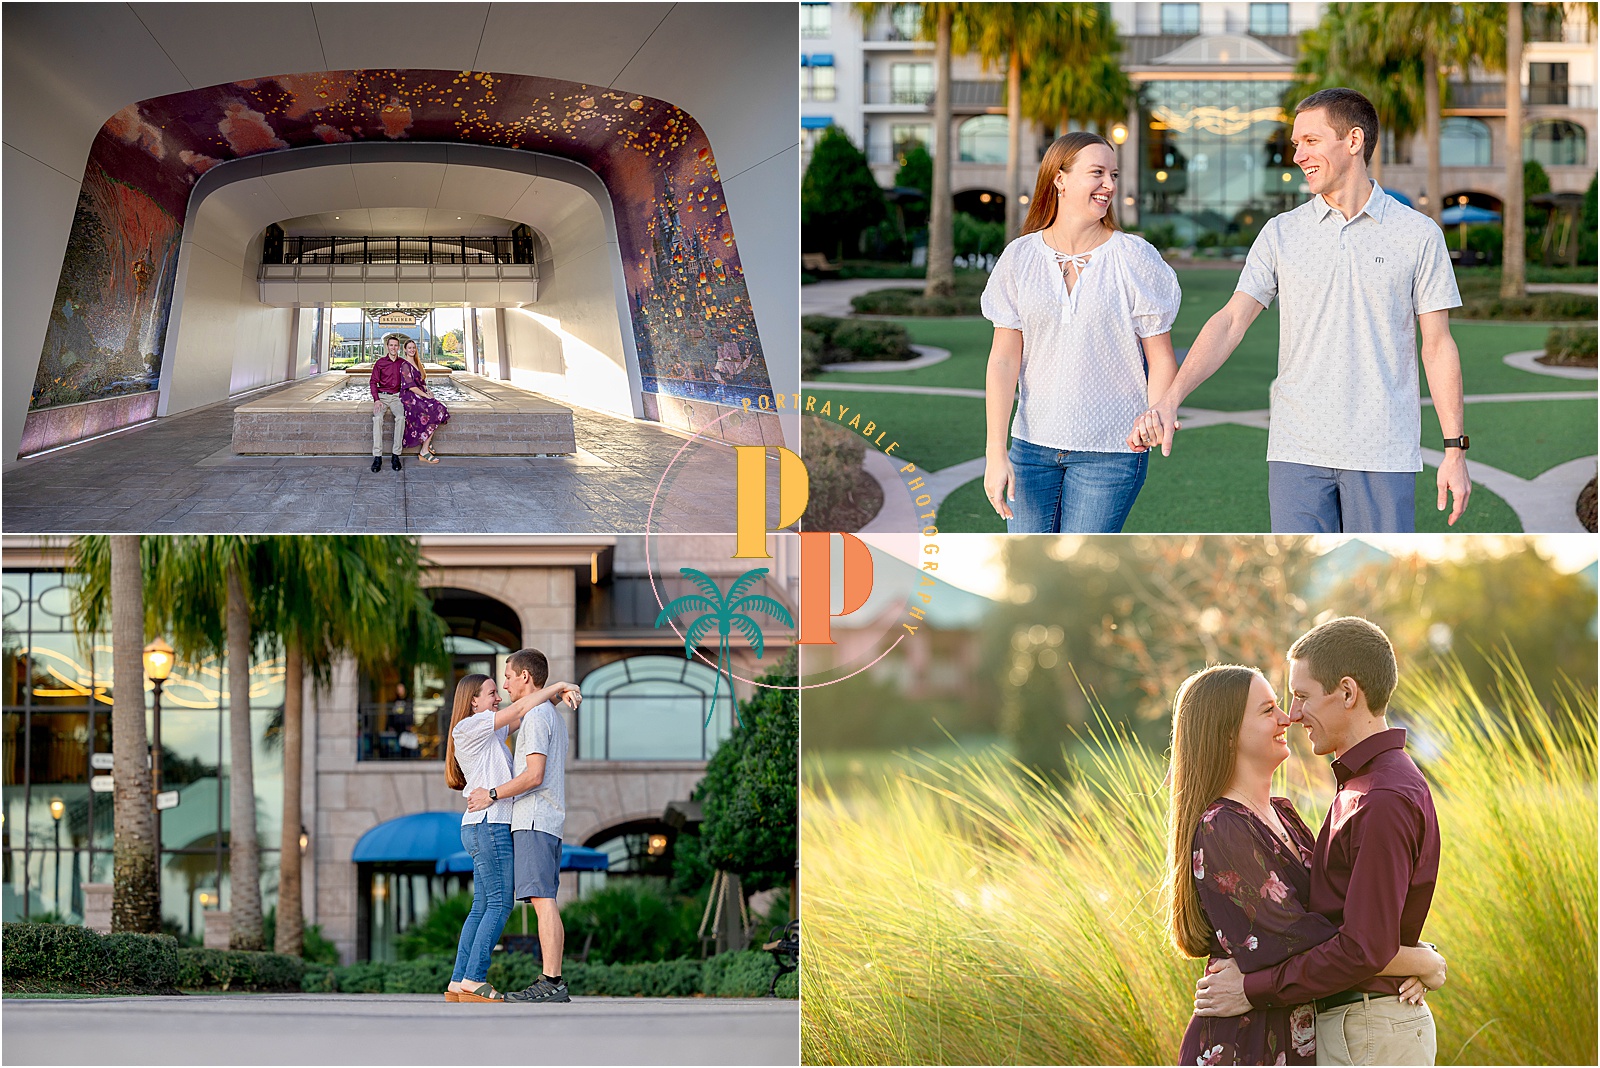 The couple shares a tender moment against the backdrop of Gaylord Palms Orlando's captivating scenery, expertly framed by the lens of a dedicated engagement photographer.